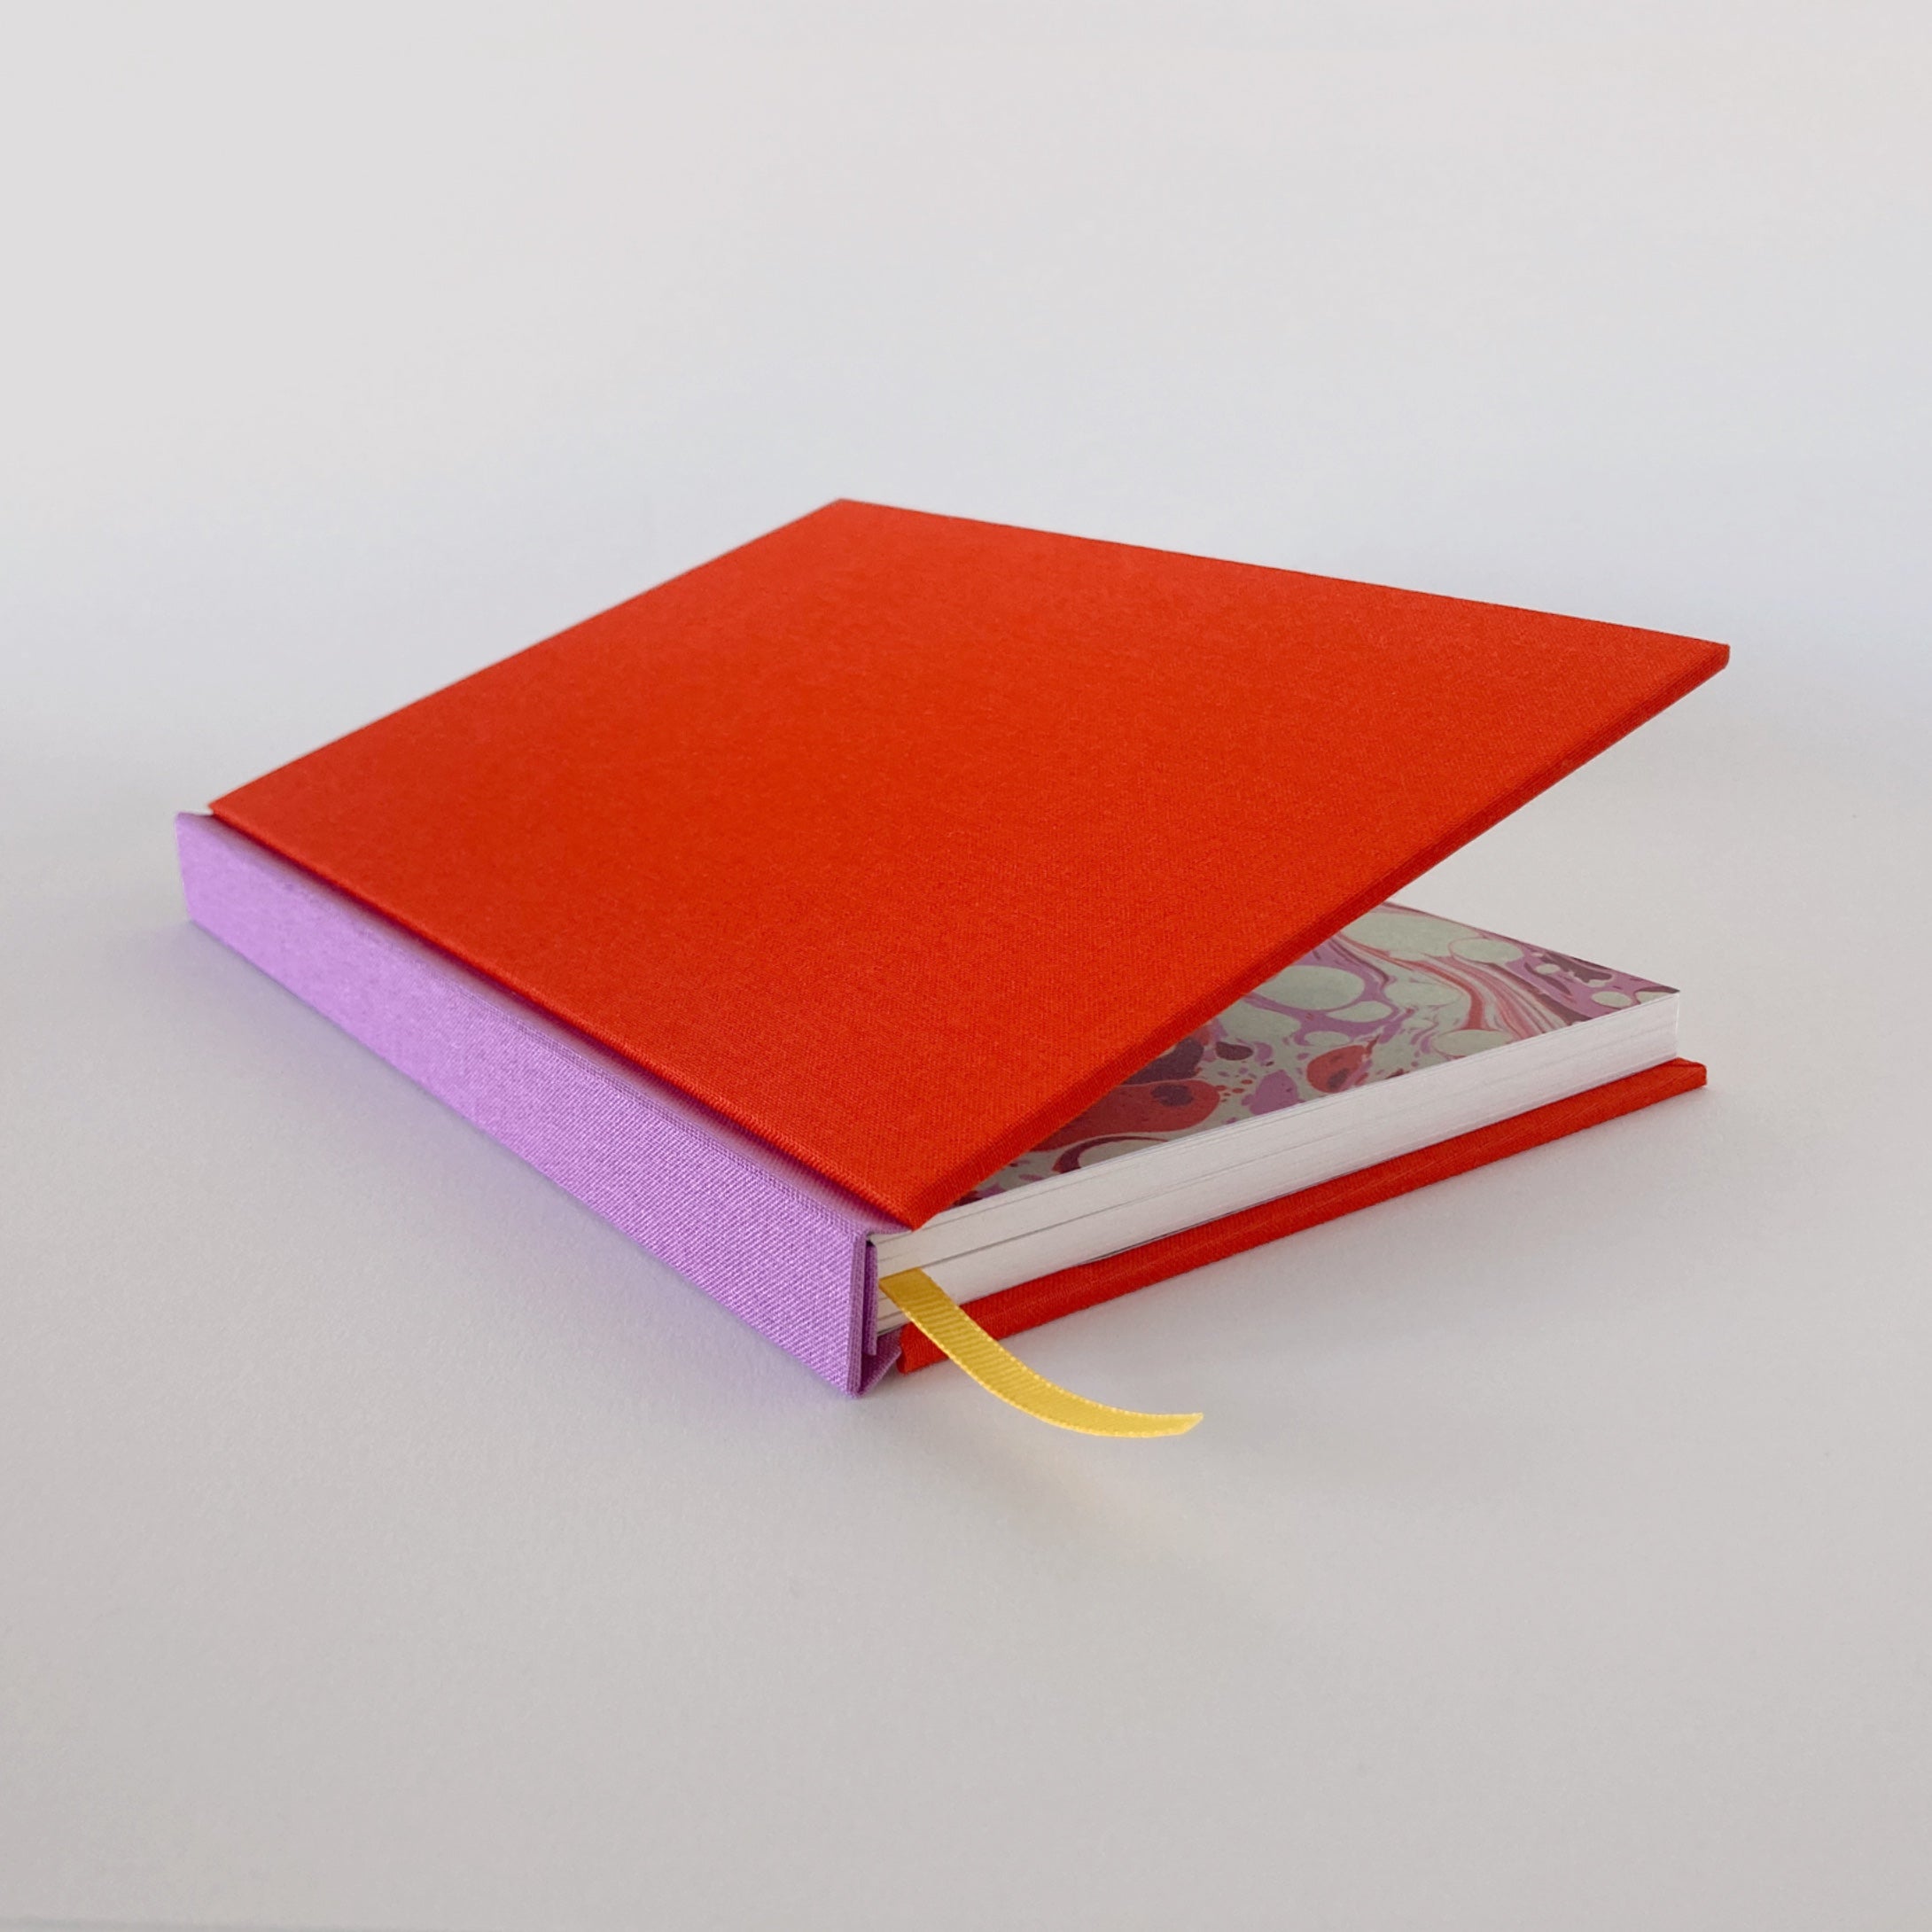 Red and pink hardback sketchbook partially open, revealing marble endpapers.